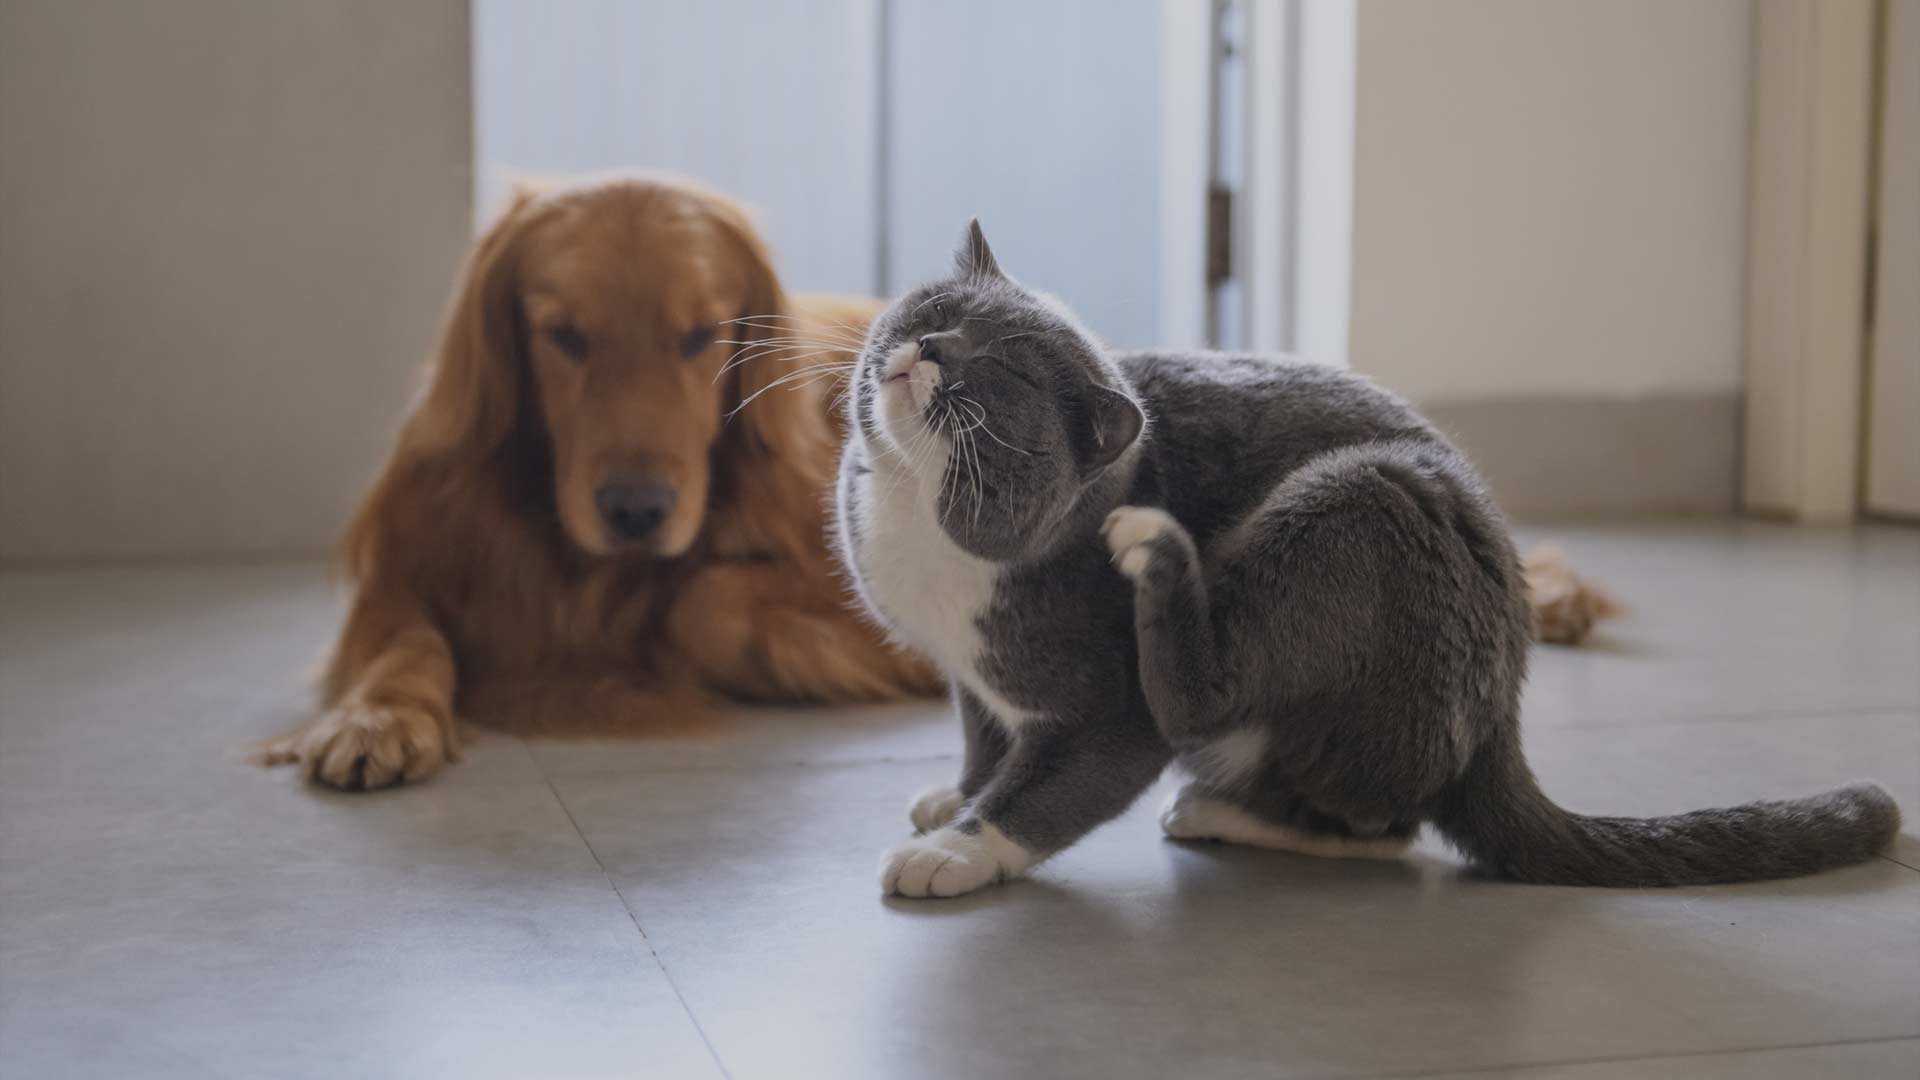 Cat scratching flees in front of dog